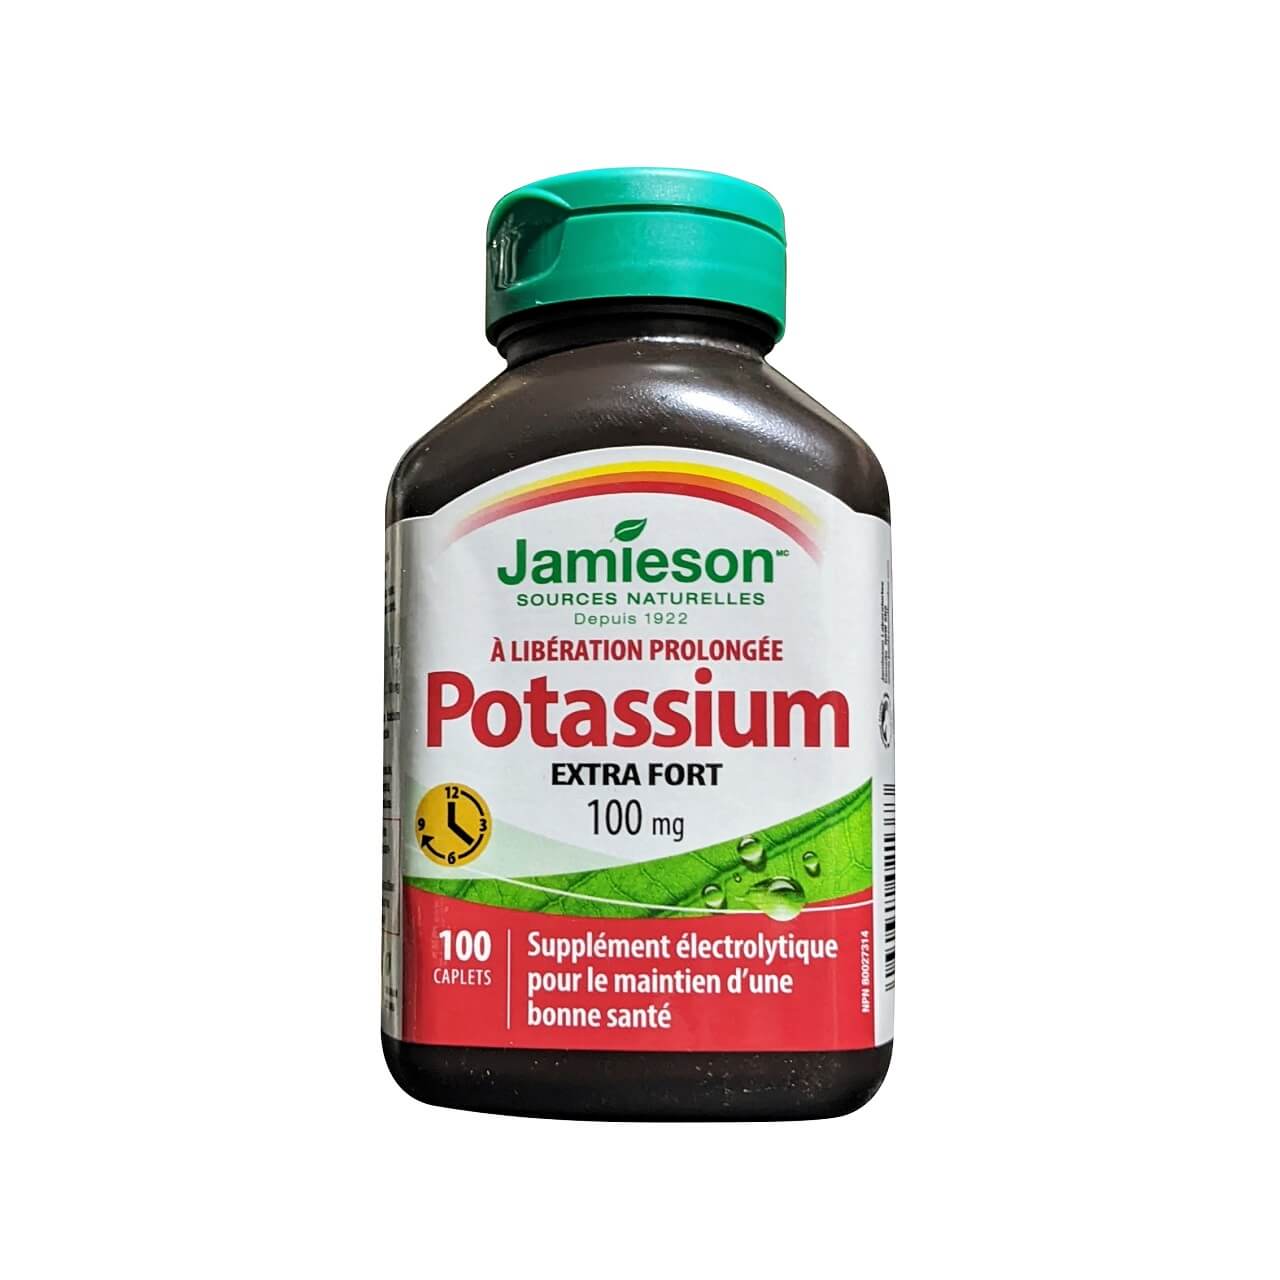 Product label for Jamieson Potassium 100 mg Extra Strength Timed Release (100 caplets) in French